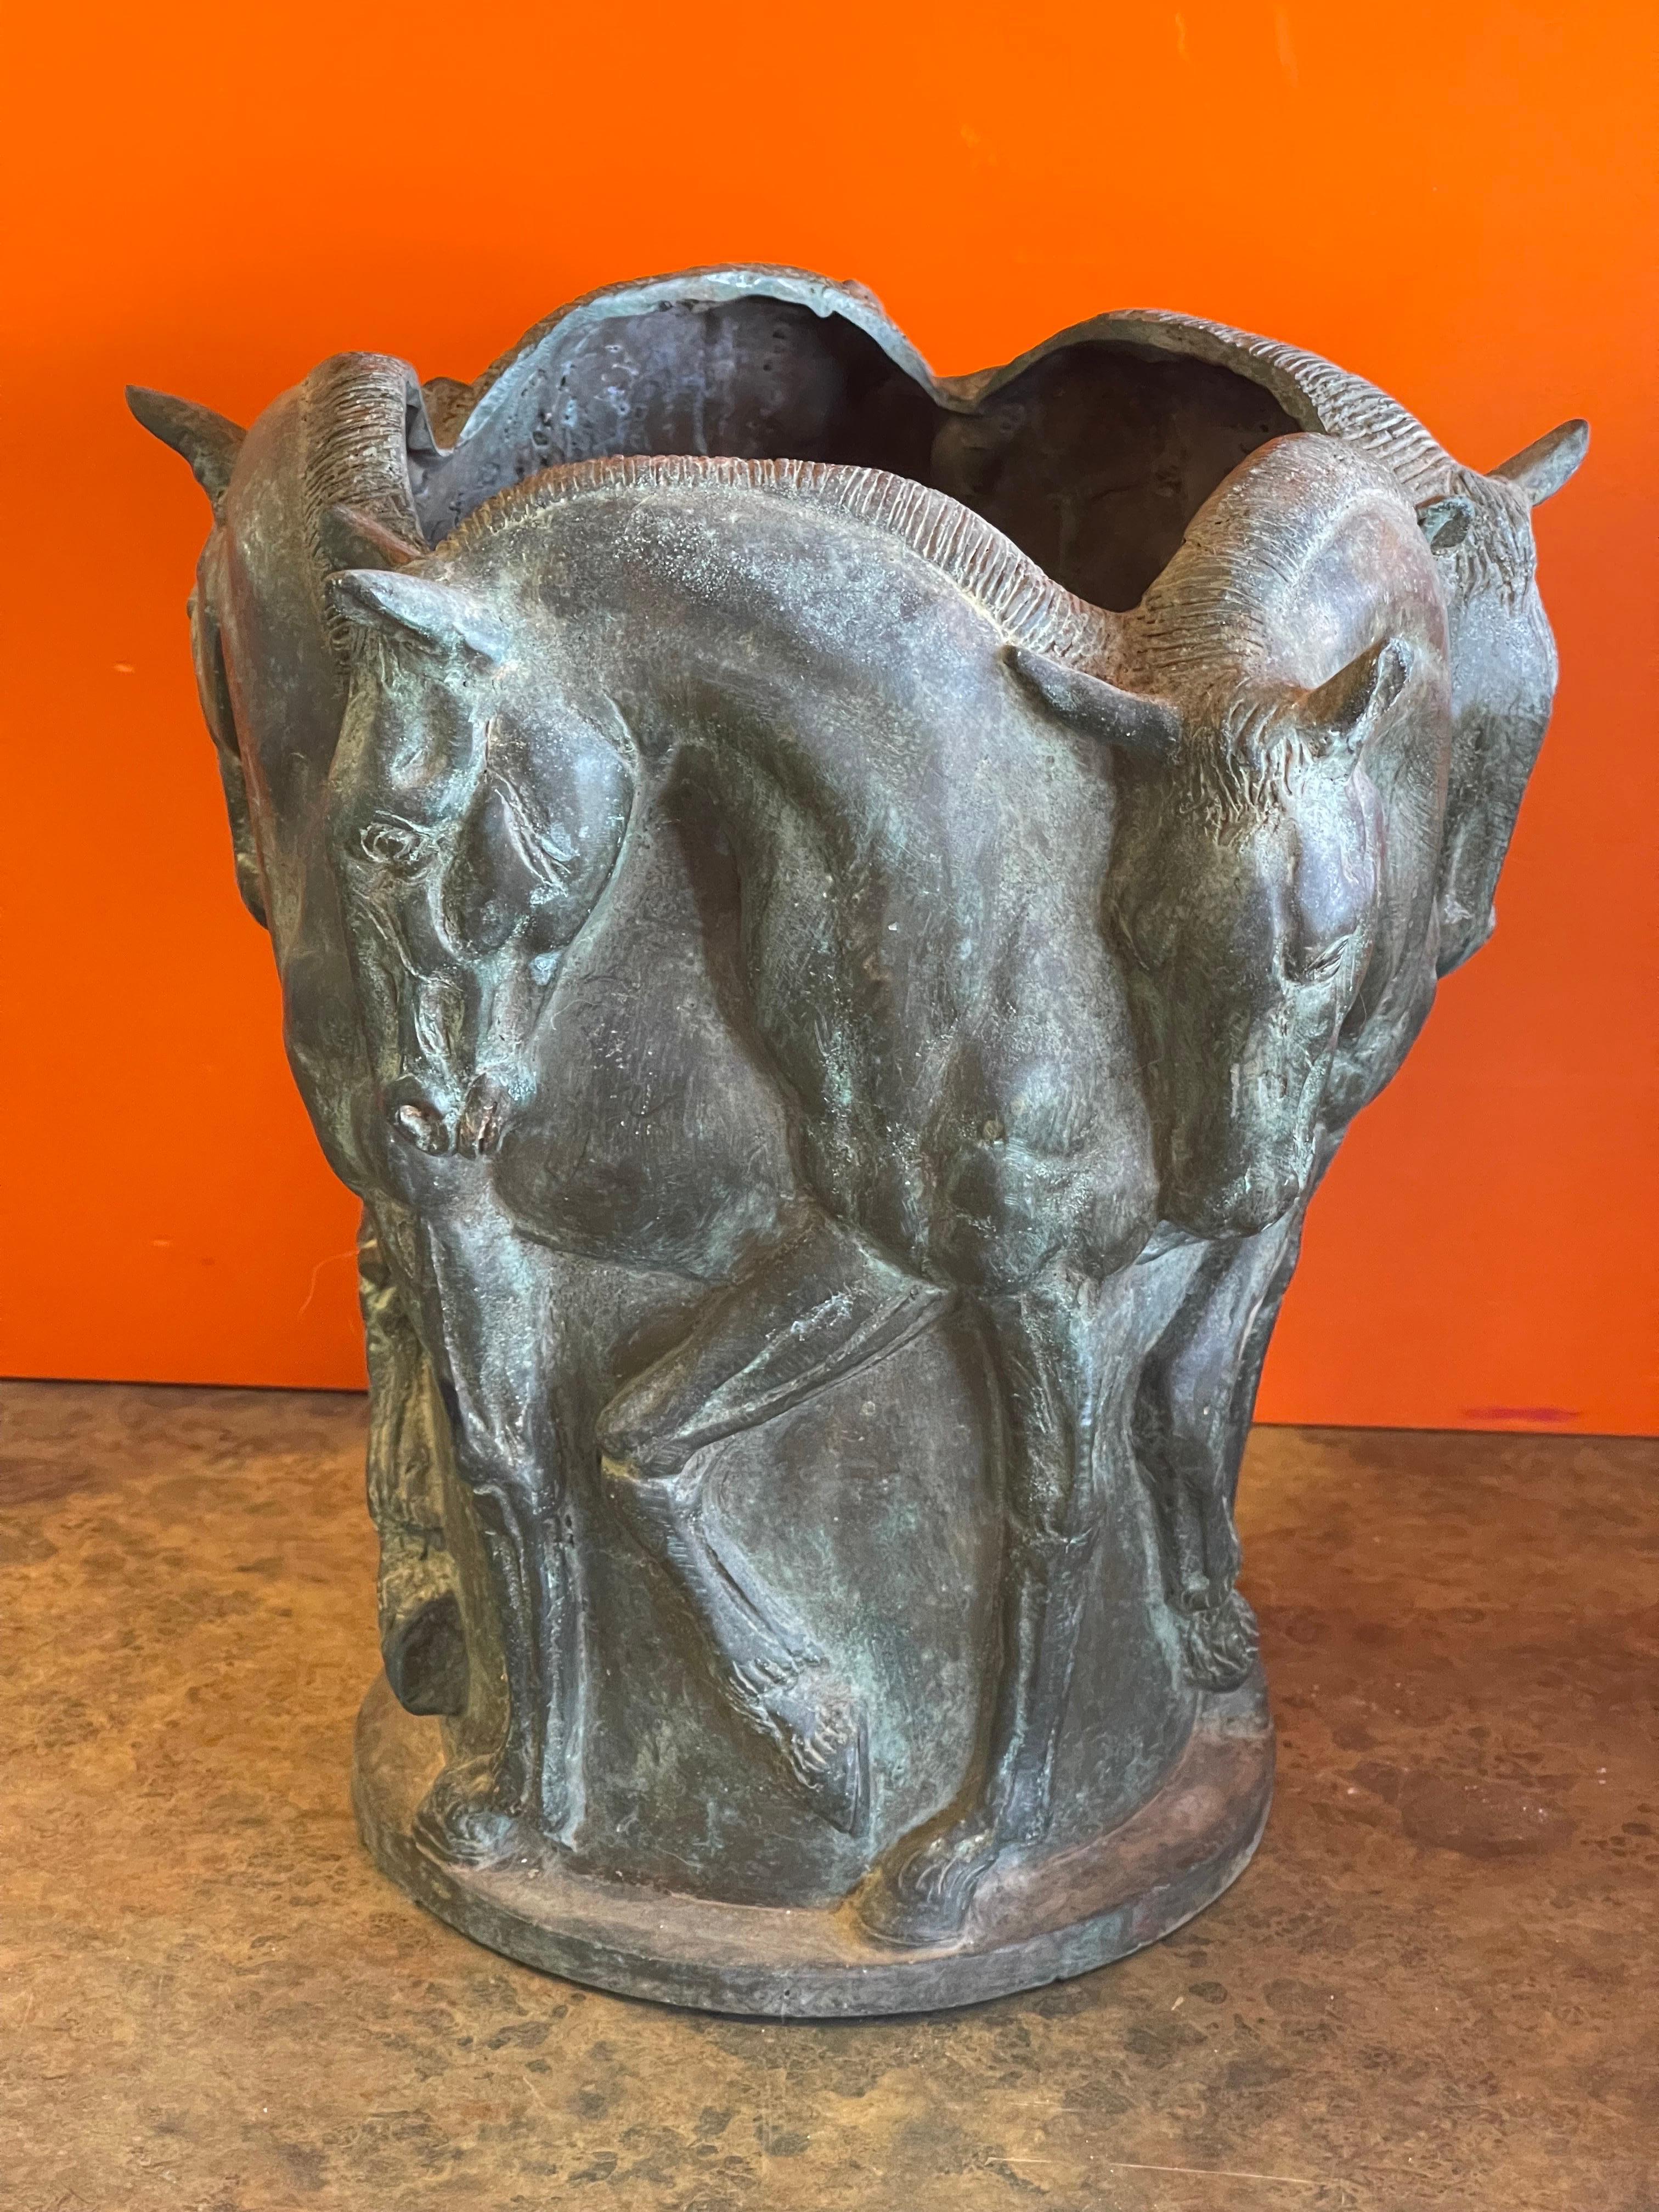 Wonderfully detailed large patinated bronze vase with horse motif, (five horses in profile encircling the vase) circa 1950s. The vase is in very good vintage condition and measures 9.5